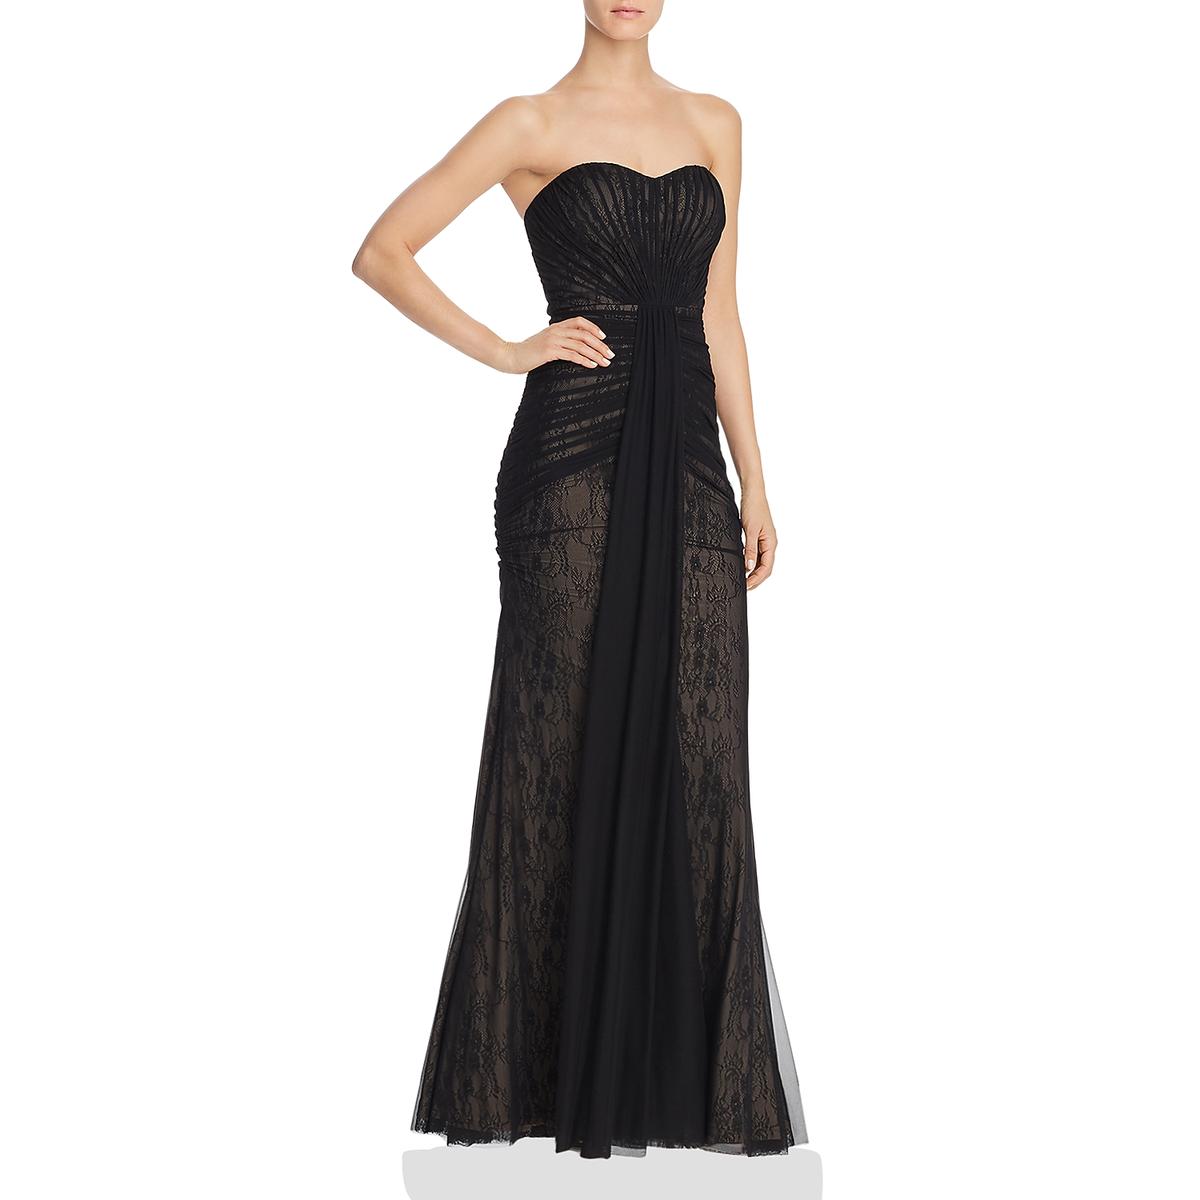 Aidan Mattox Womens Black Tulle Ruched Strapless Evening Dress Gown 4 ...